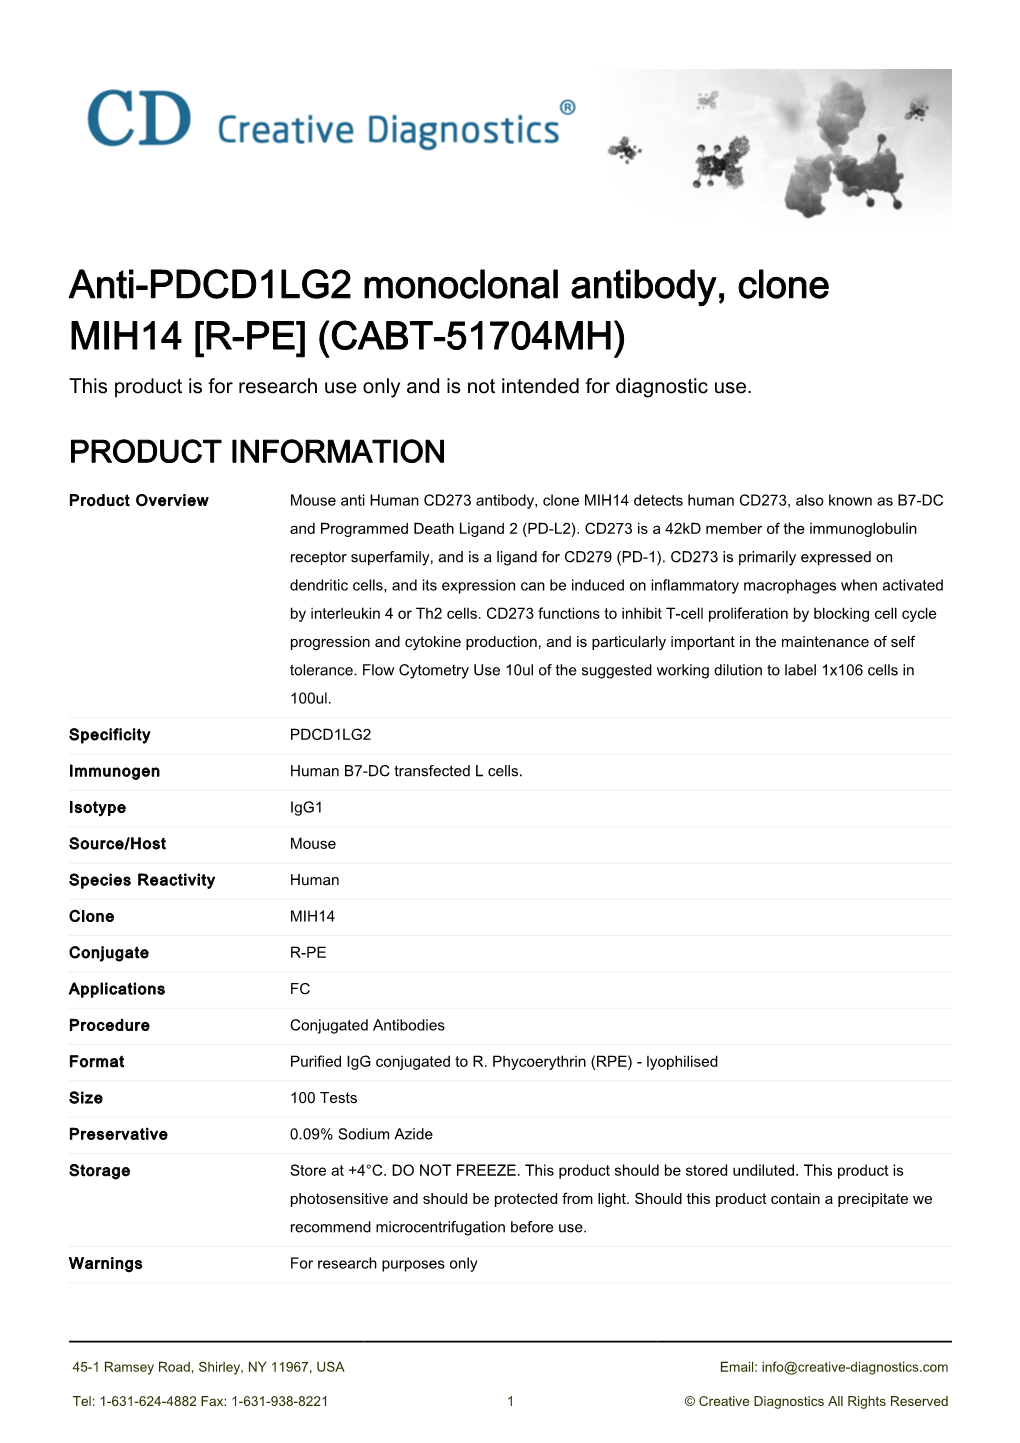 Anti-PDCD1LG2 Monoclonal Antibody, Clone MIH14 [R-PE] (CABT-51704MH) This Product Is for Research Use Only and Is Not Intended for Diagnostic Use